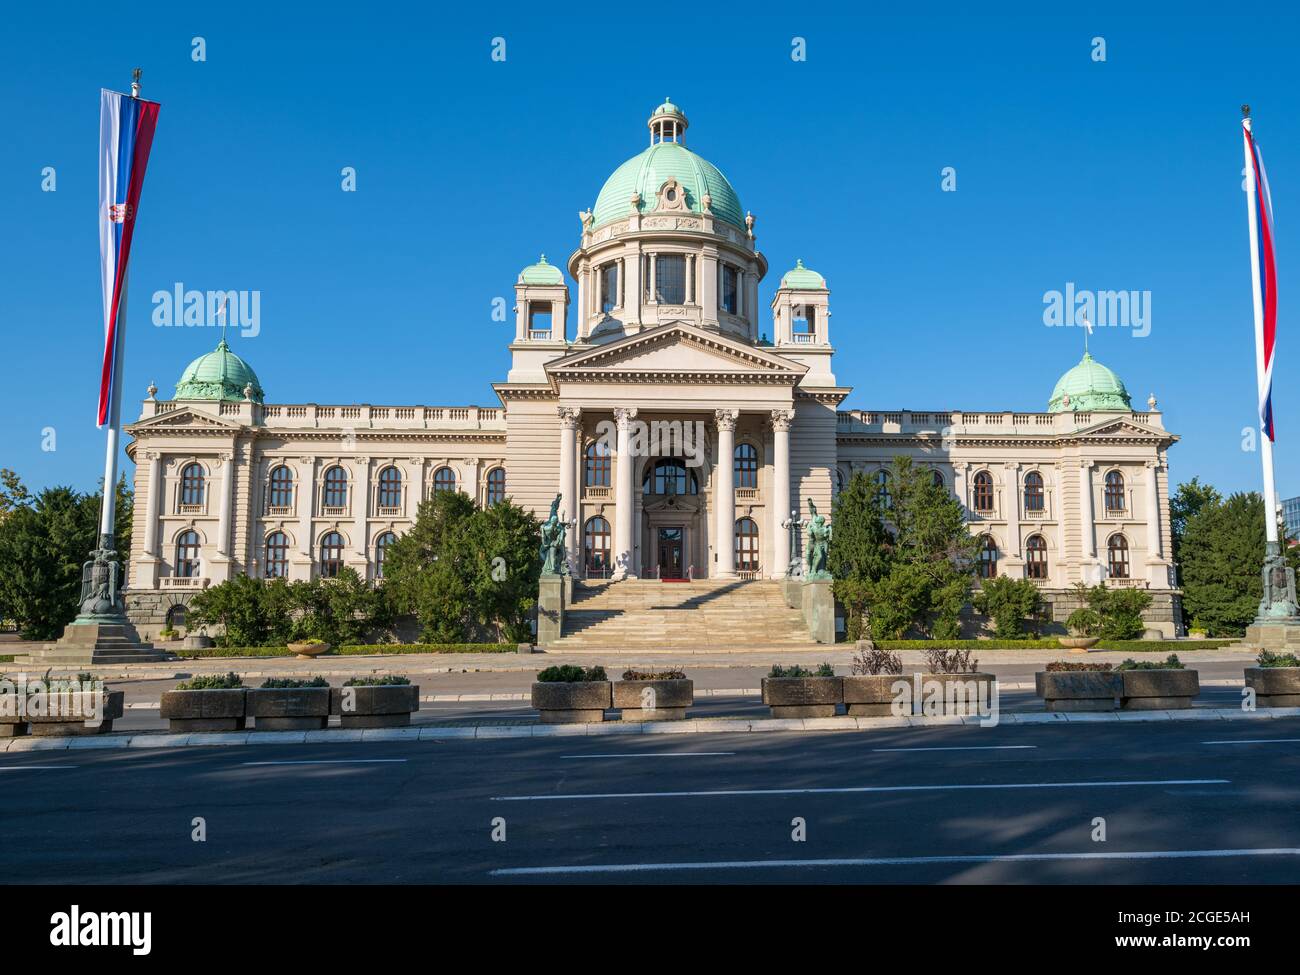 Summer House of the National Assembly of the Republic of Serbia (Skupstina) in the center of city of Belgrade, Serbia, Europe. Construction lasted unt Stock Photo